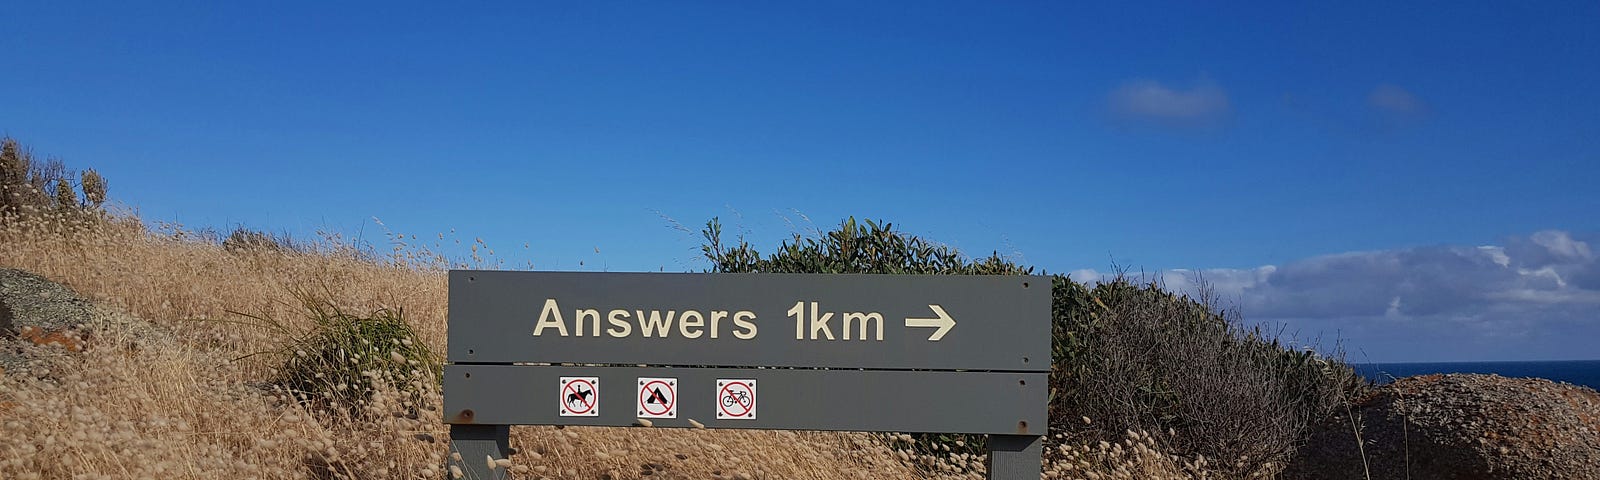 Sign that says “Answers 1KM” with an arrow pointing right.